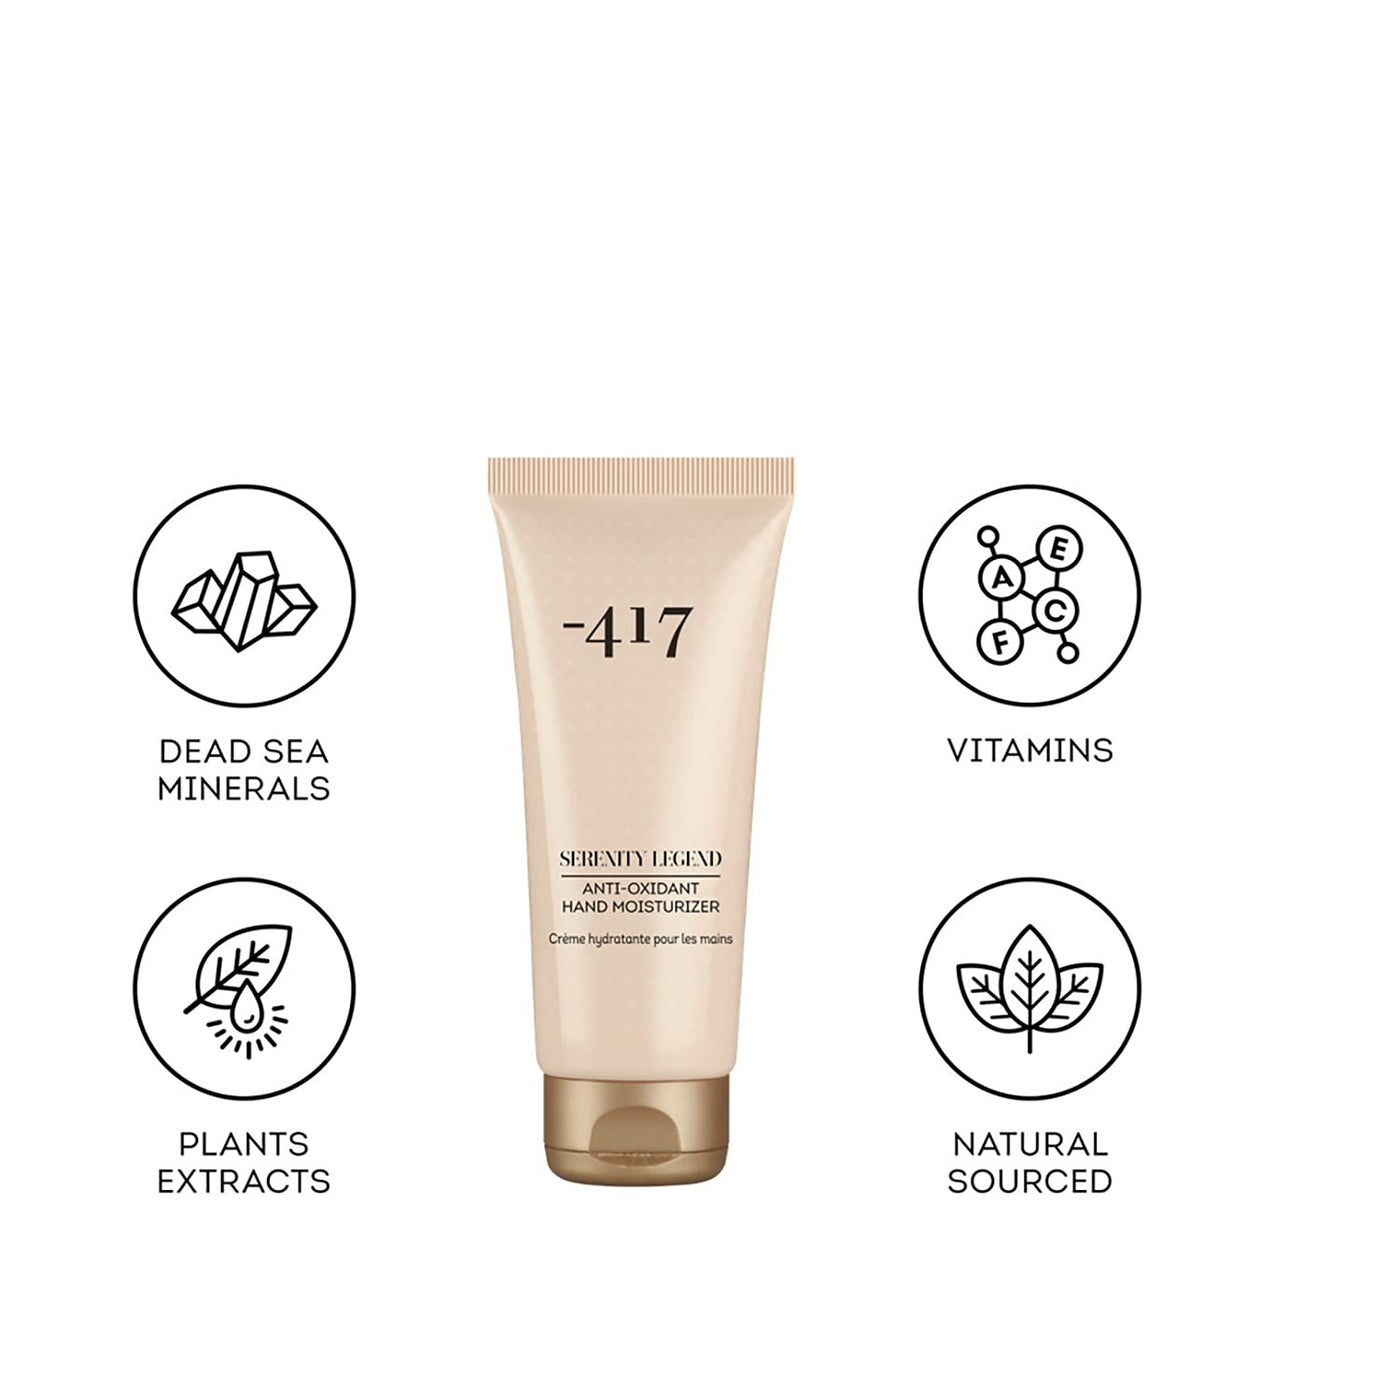 -417 Dead Sea Cosmetics Anti-Aging Hand Cream For Dry, Cracked Skin & Working Hands features Essential Vitamins & Oils From The Dead Sea, Intensive and Non-Greasy Hand Cream 3.4 oz.